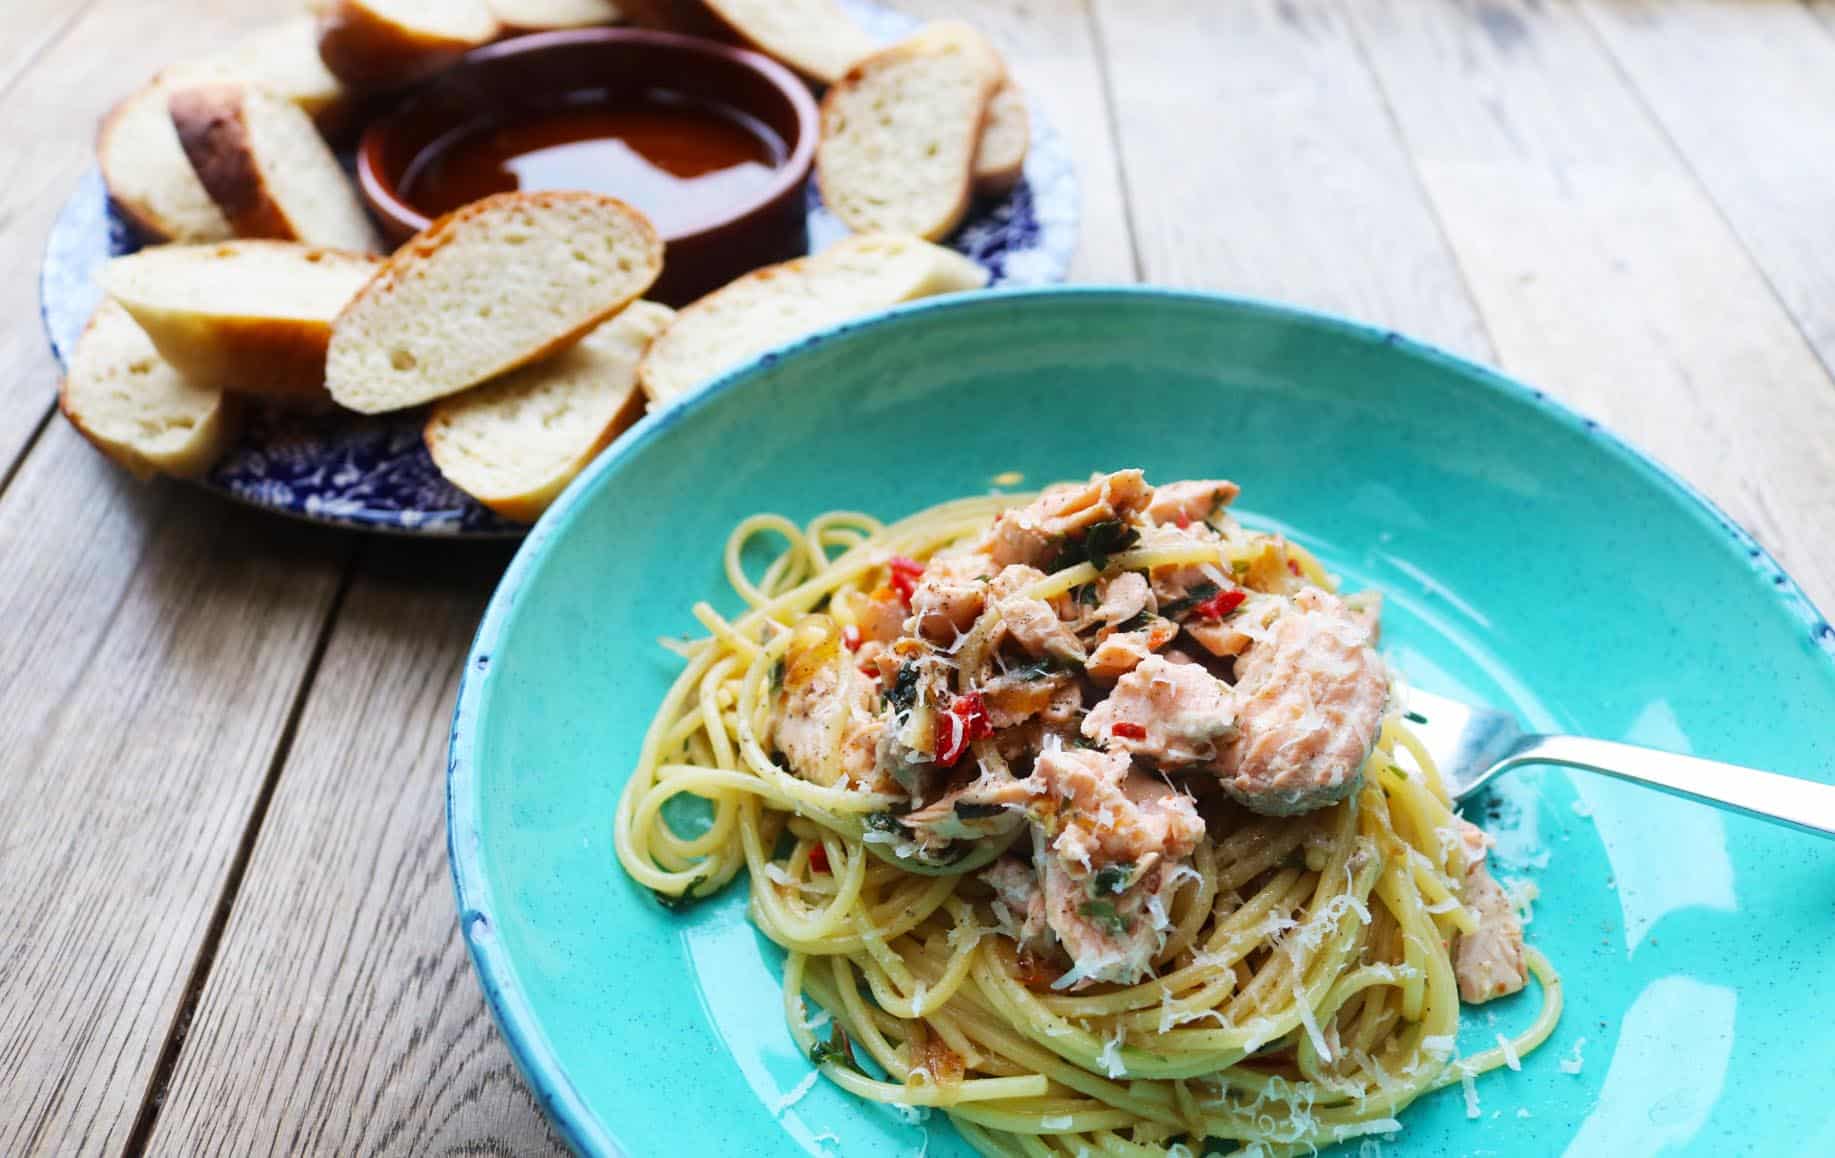 Spaghetti and salmon served in a turquoise blue pasta bowl with bread and oil on a plate on the side